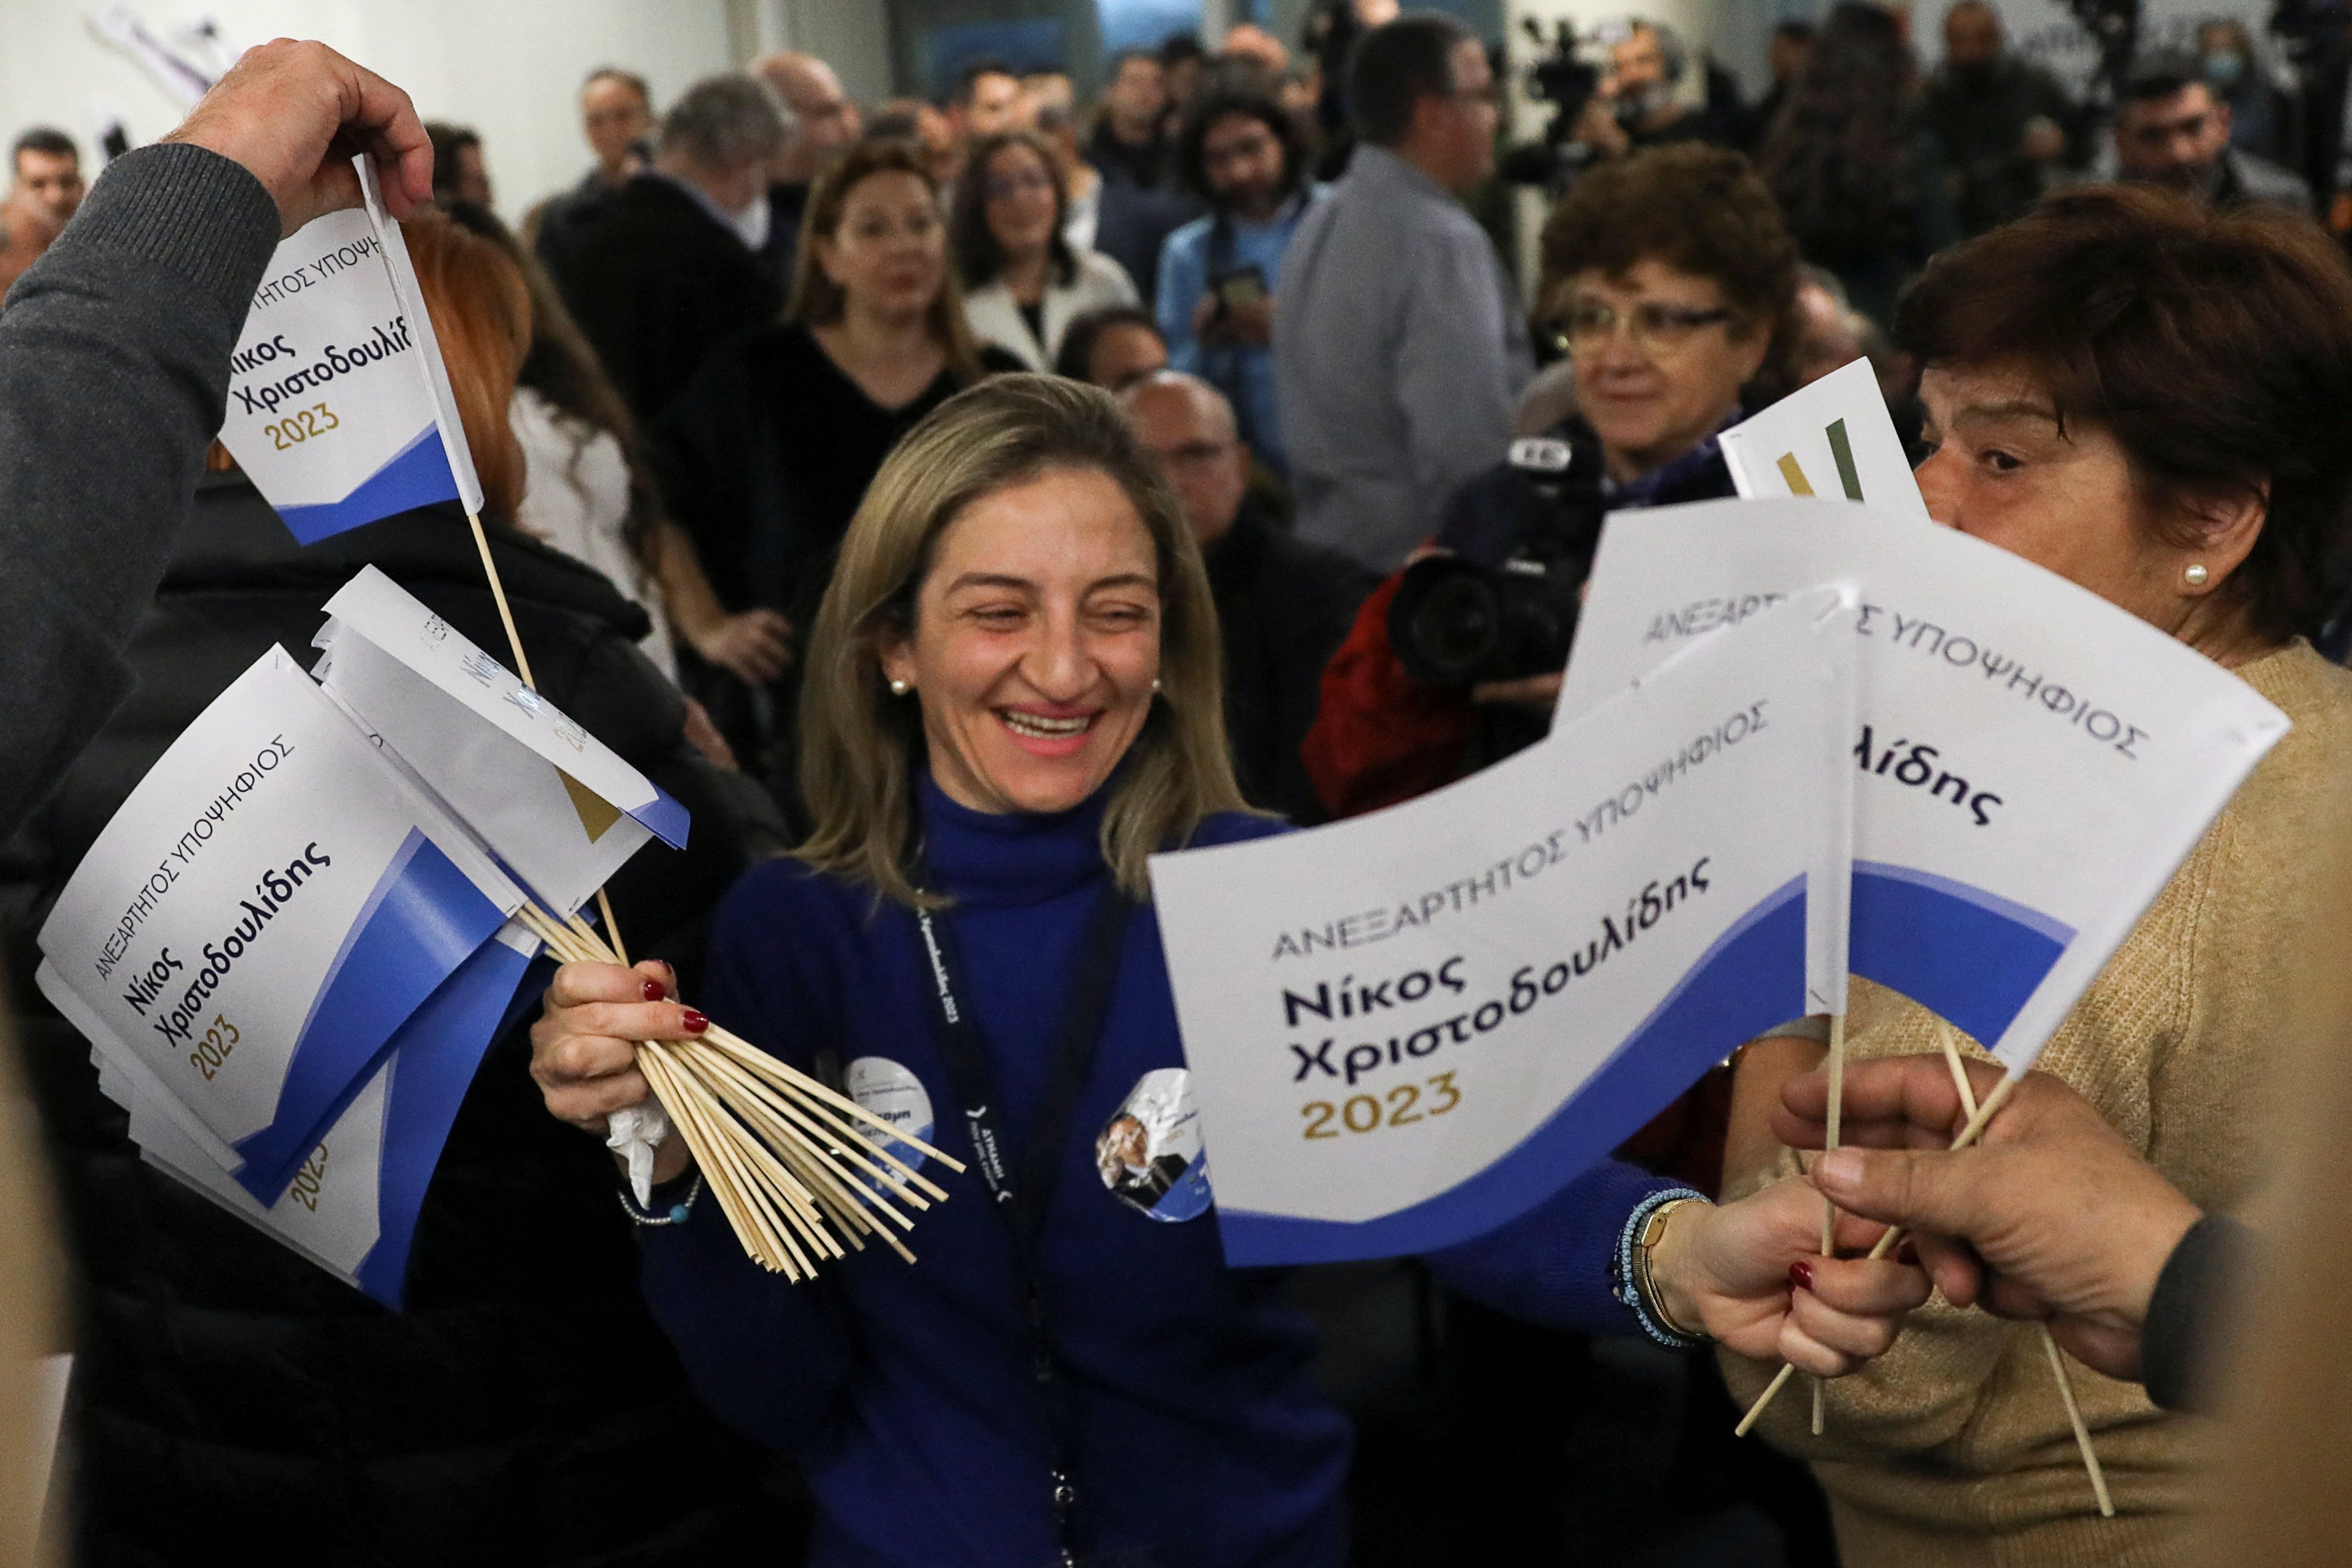 A woman hands out flags to supporters of Cypriot presidential candidate Nikos Christodoulides at the campaign headquarters in Nicosia, Cyprus on Sunday. Photo: Reuters